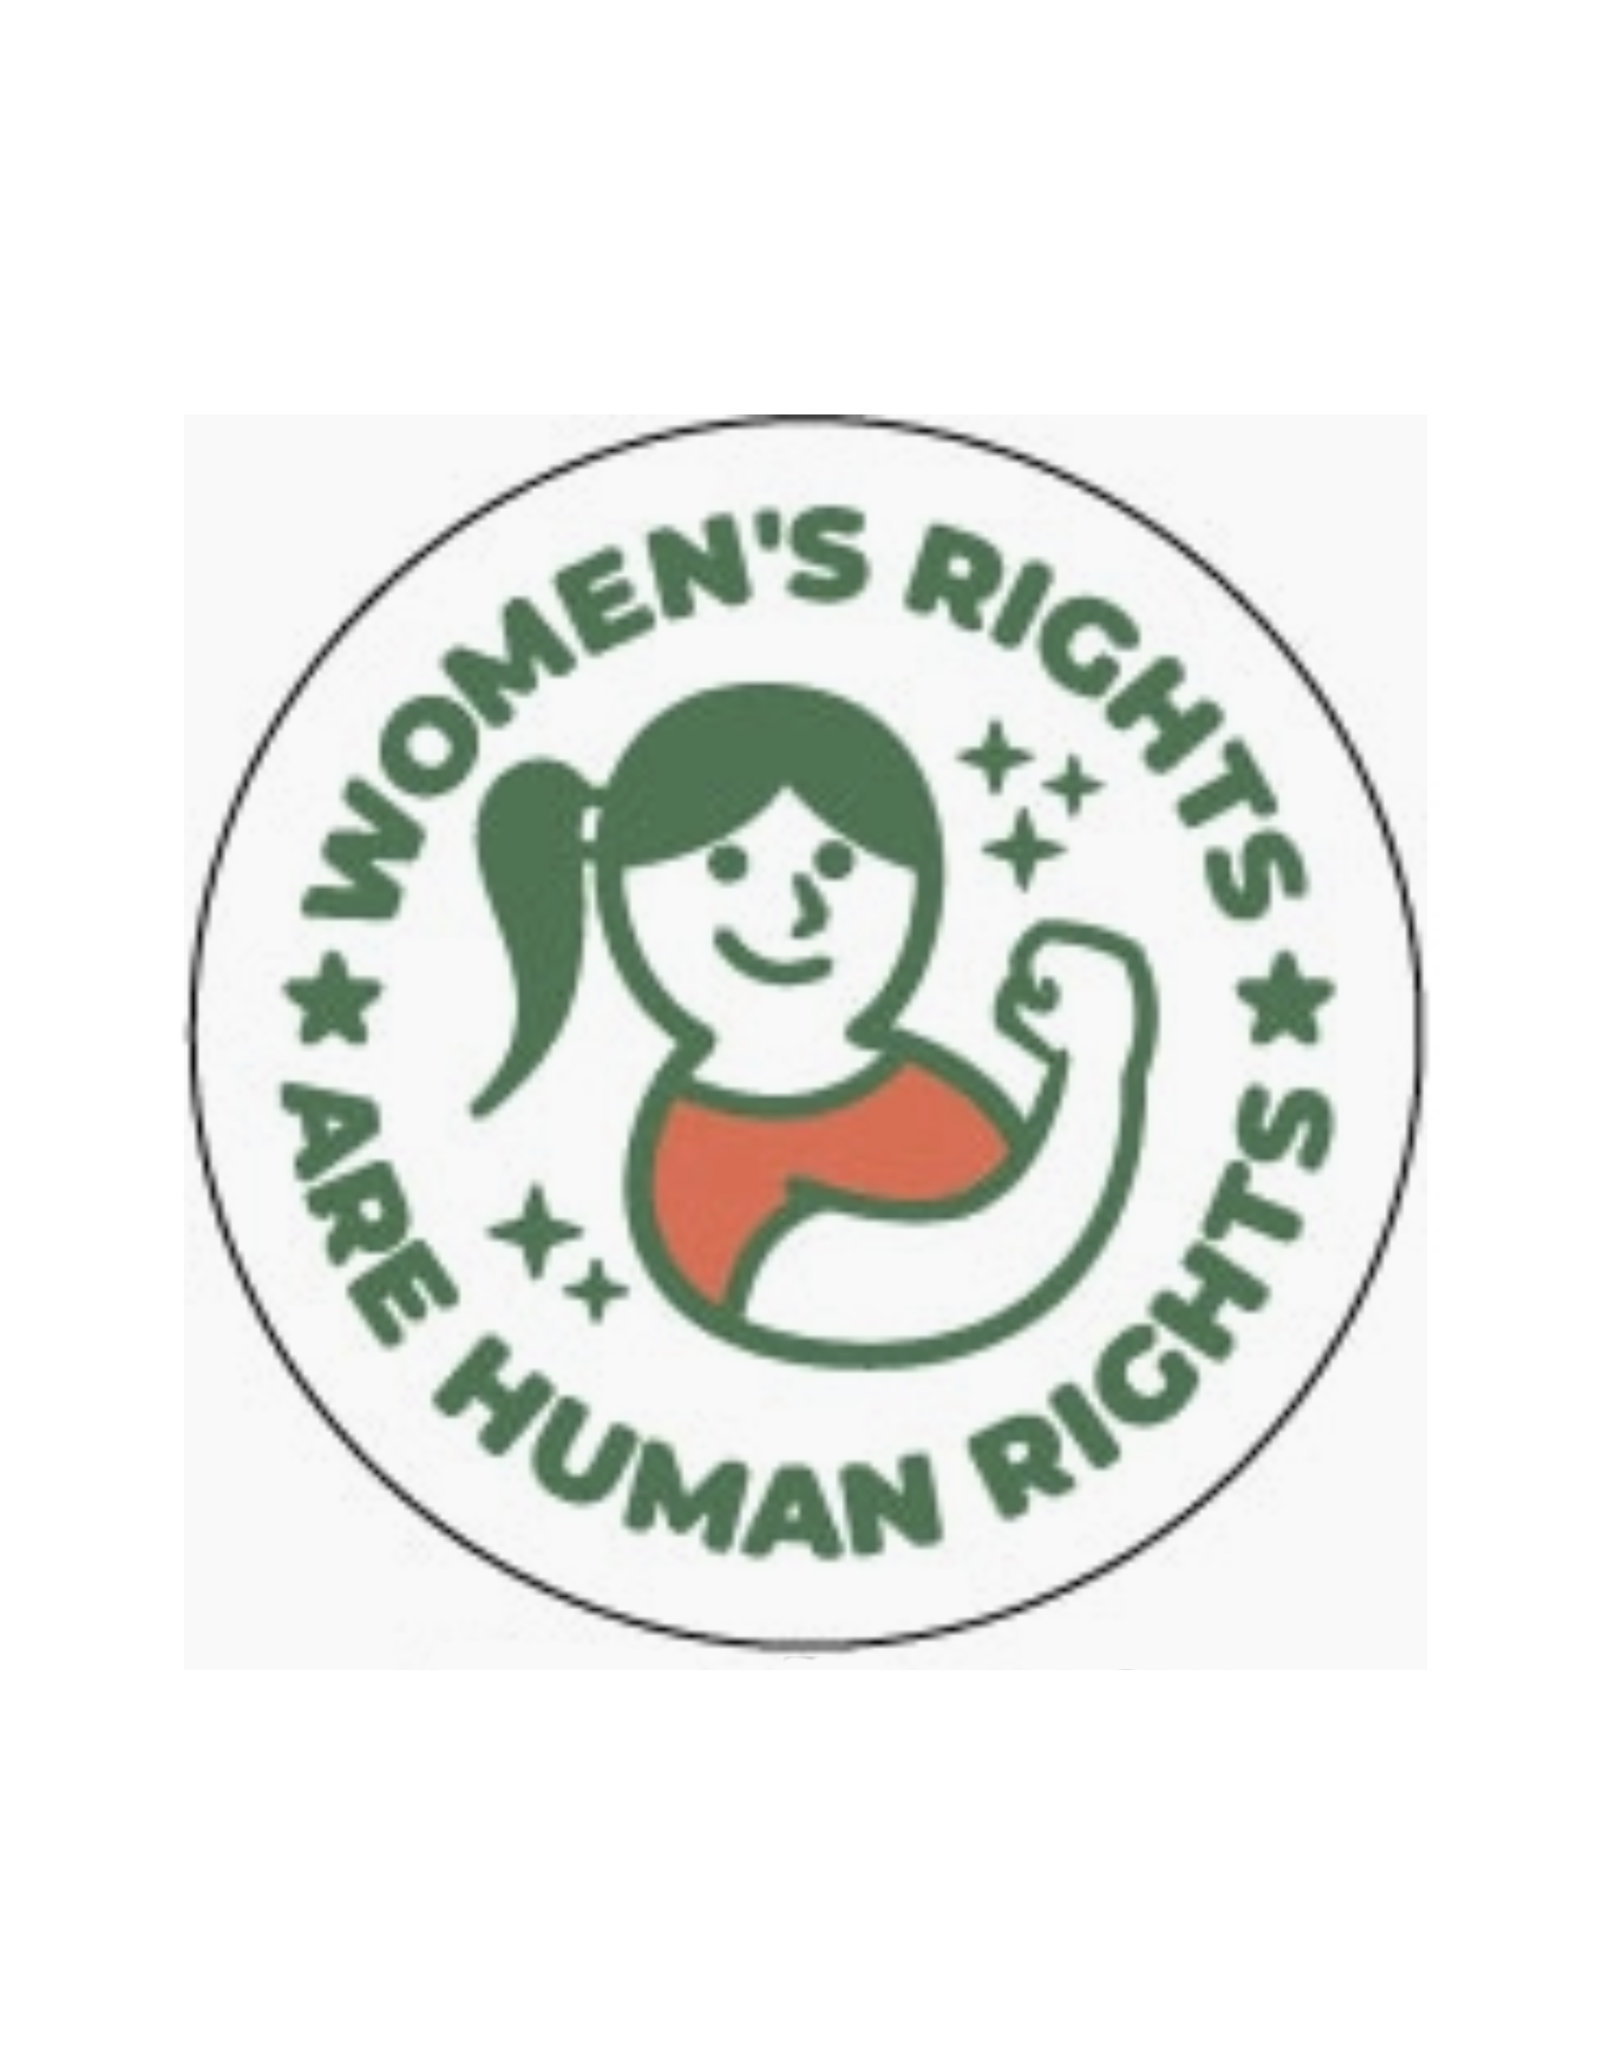 Women's Rights are Human Rights Round Magnet